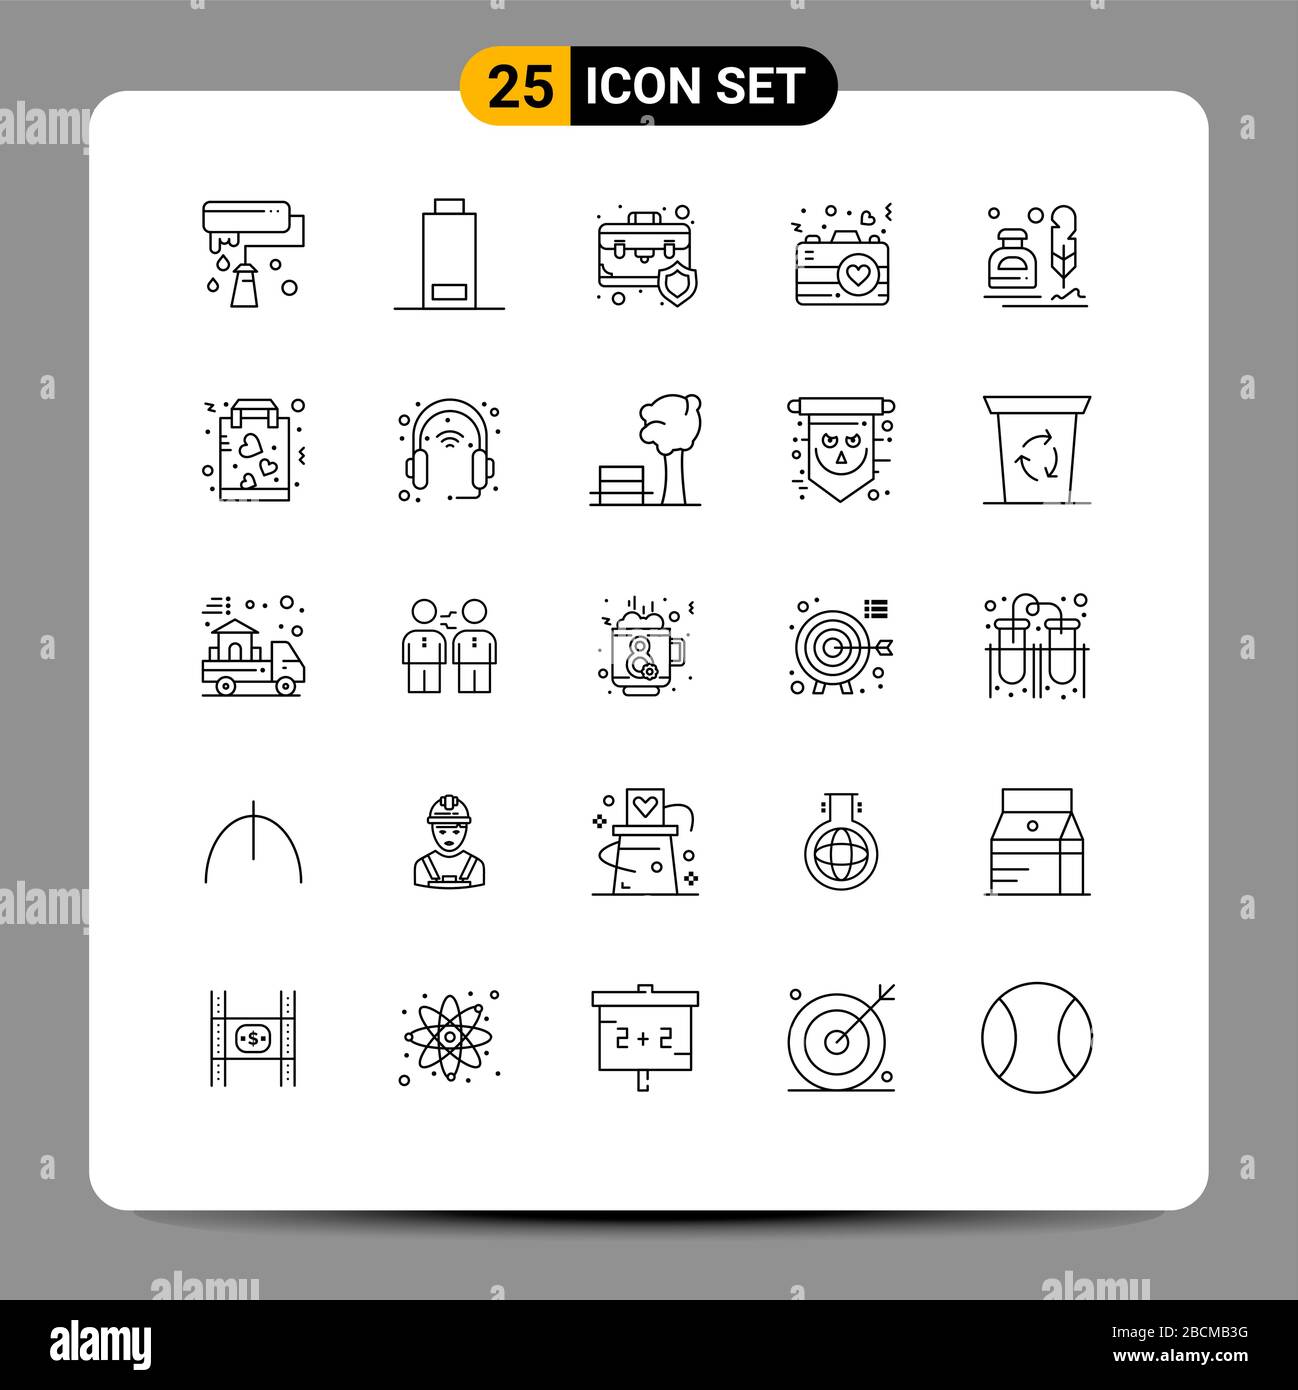 Modern Set of 25 Lines and symbols such as erite, romance, briefcase, love, camera Editable Vector Design Elements Stock Vector